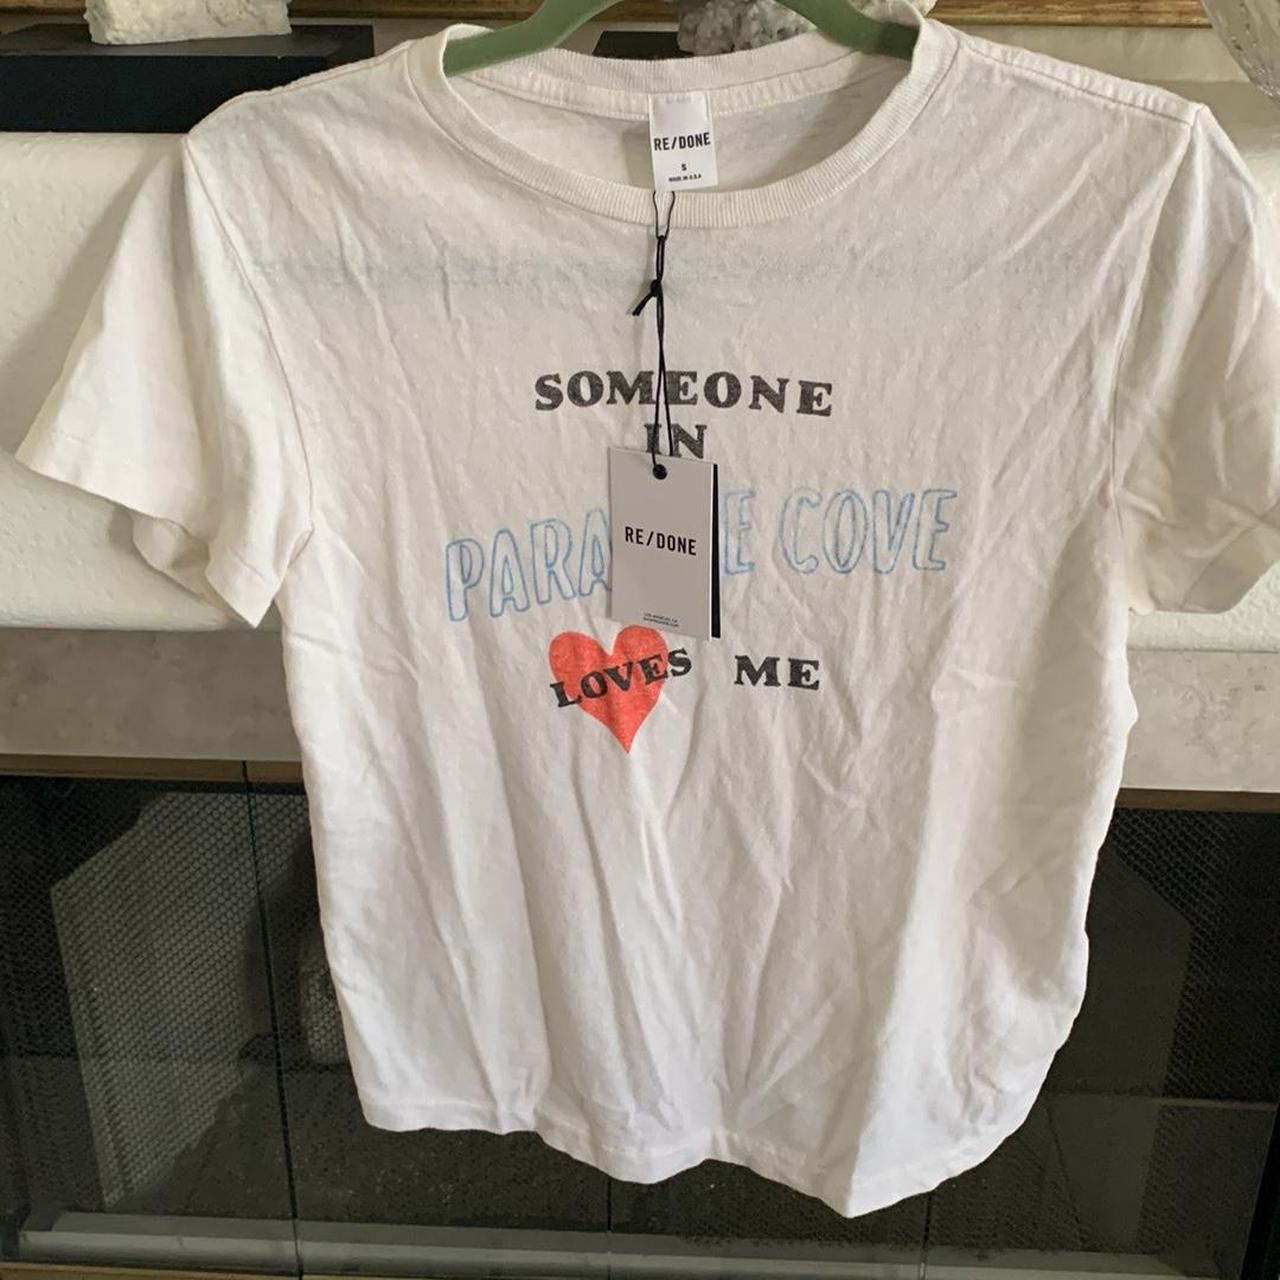 RE/DONE Women's White and Blue T-shirt (2)